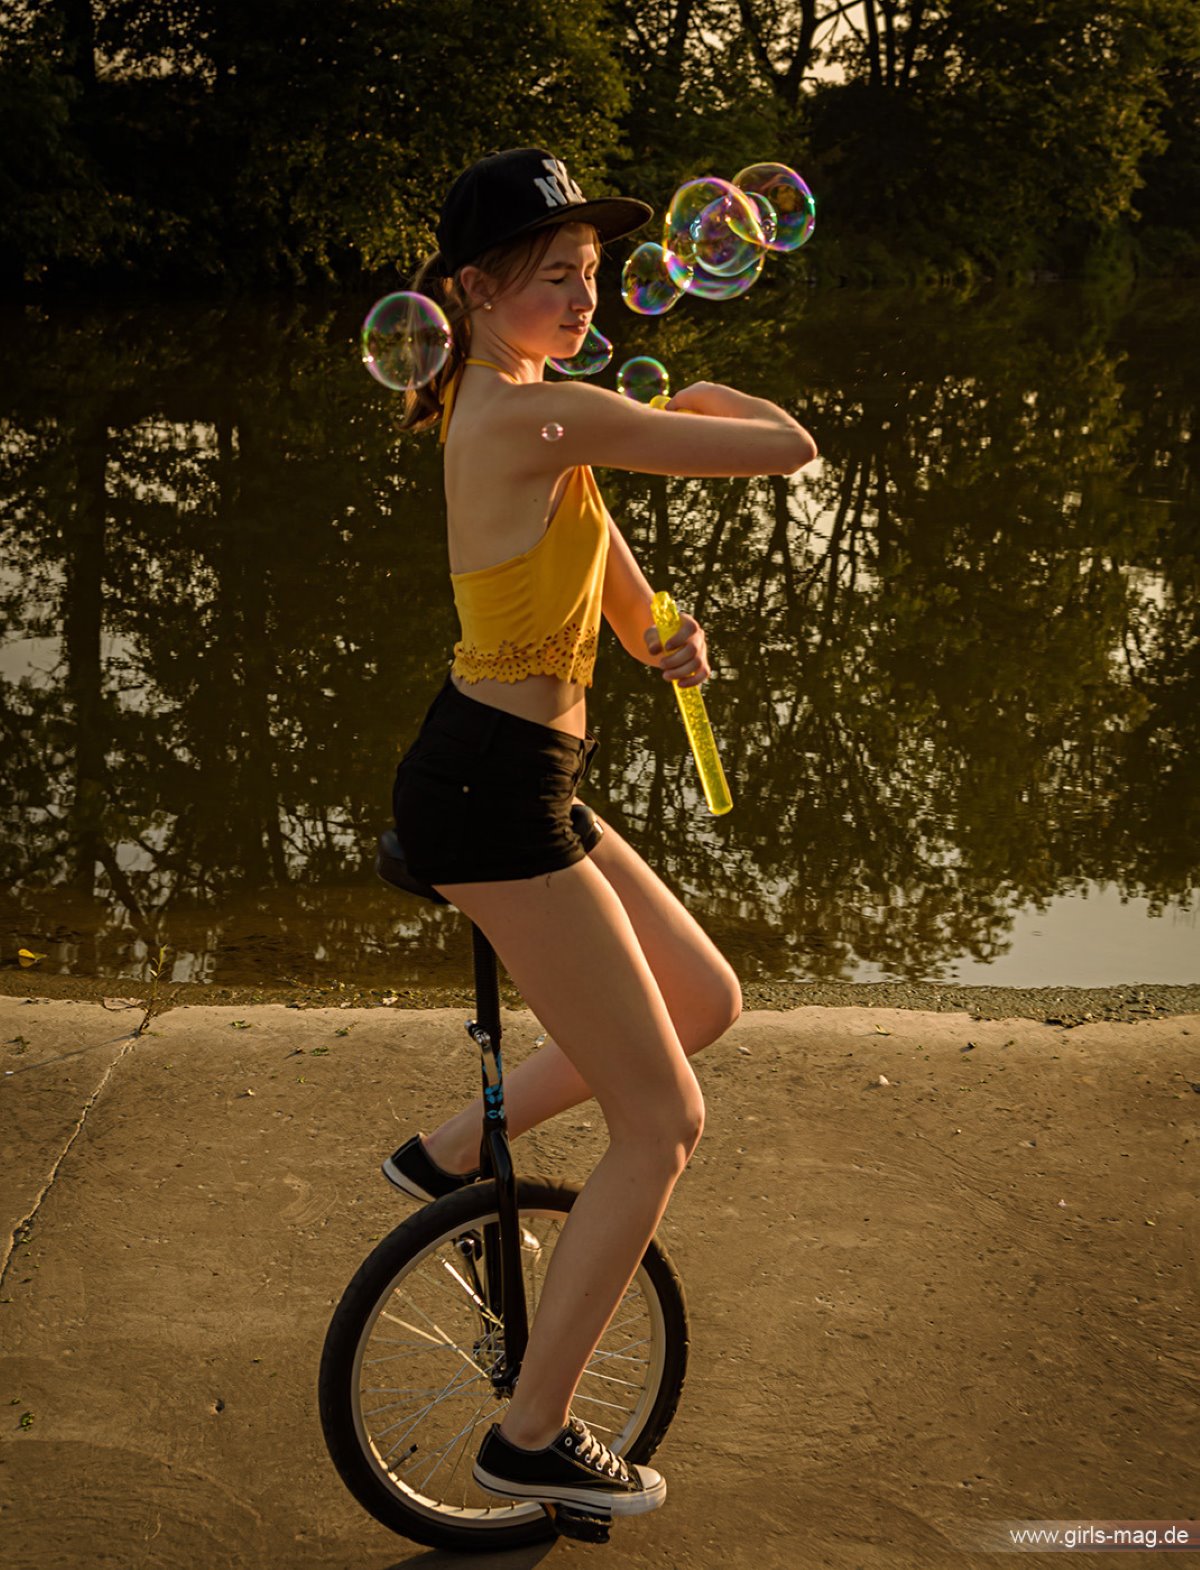 Girls Mag Annika Bubbles on a Unicycle 0094 2979430262.jpg